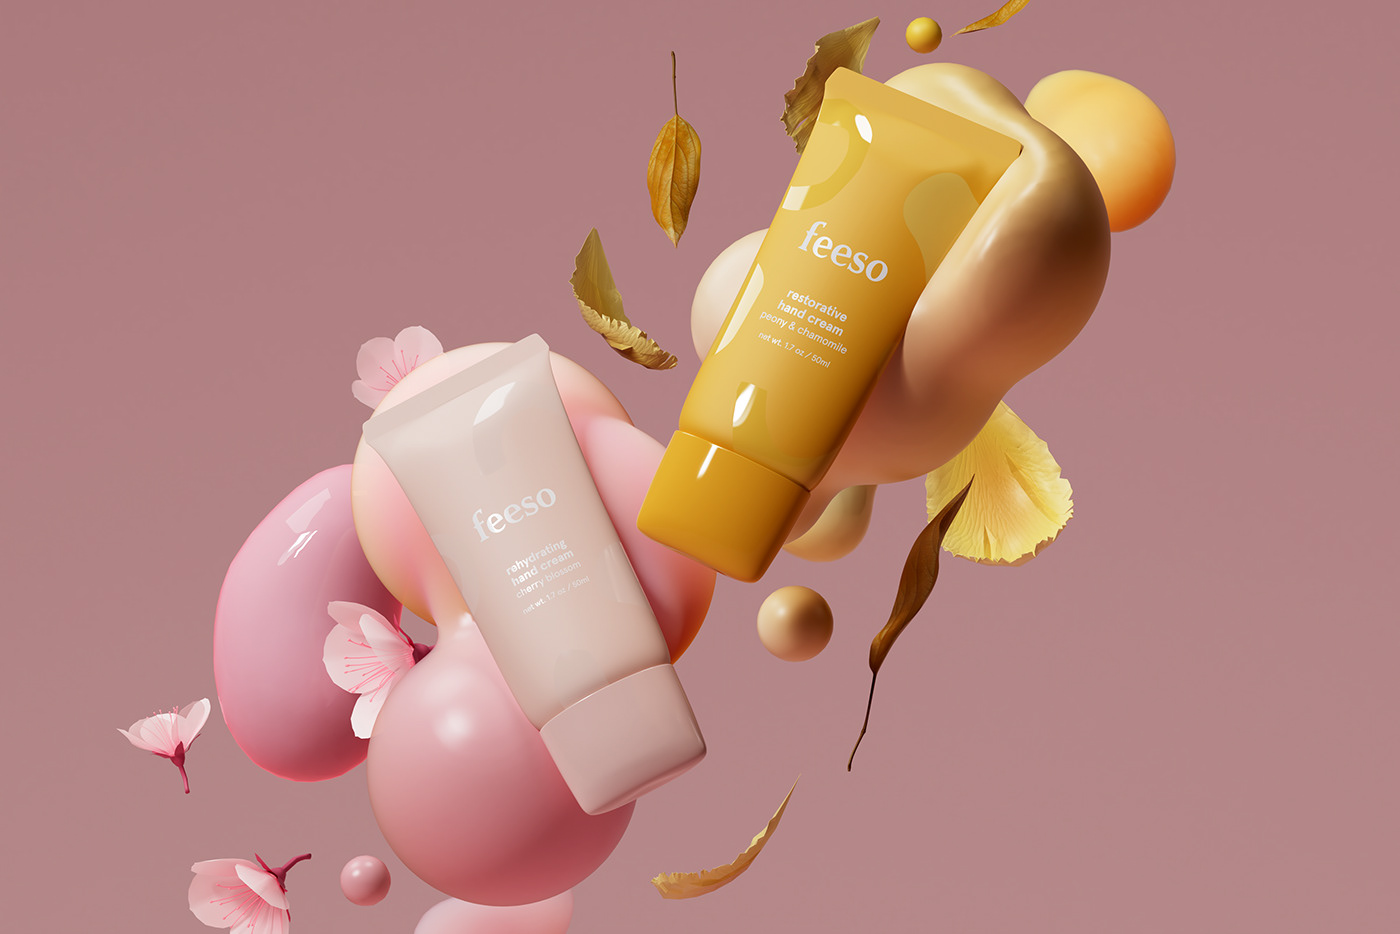 3d Visualisation 3D Visualization date of birth design feeso hand cream mimimal Packaging pink yellow